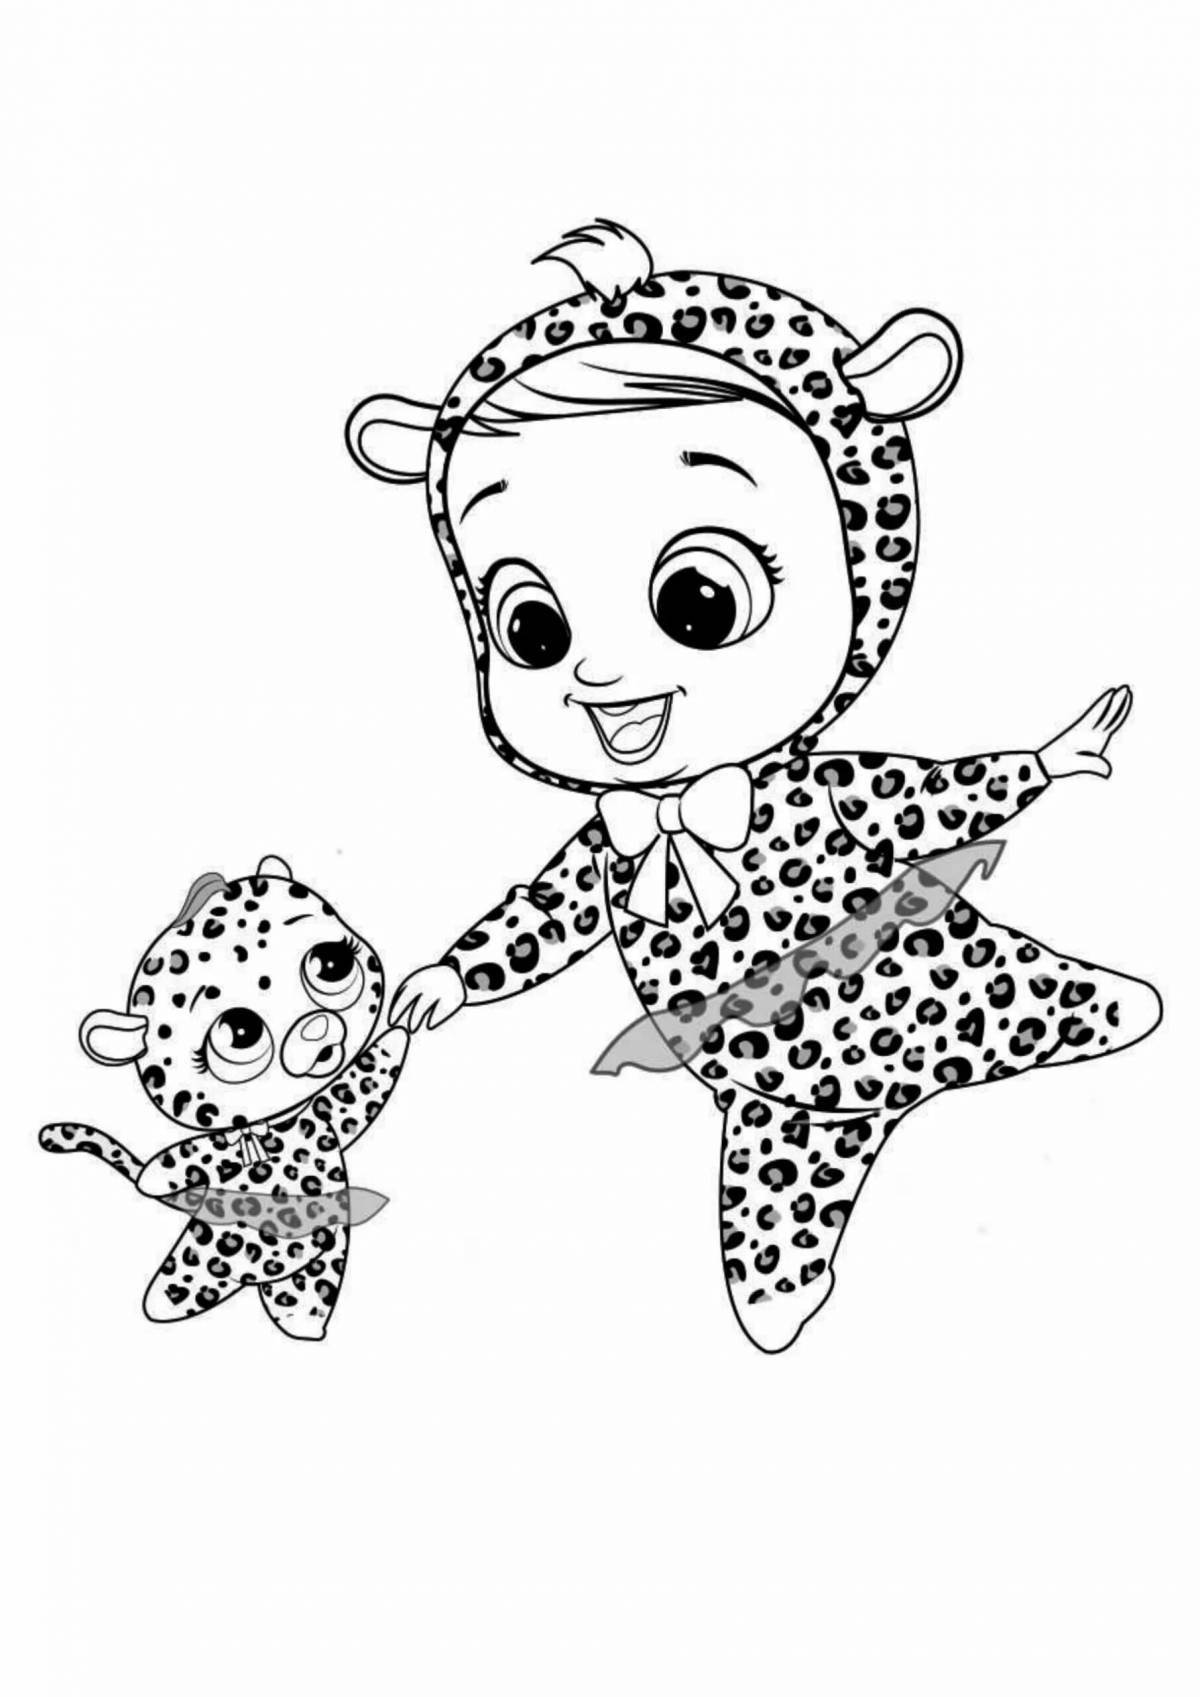 Baby's edge fun coloring book for kids